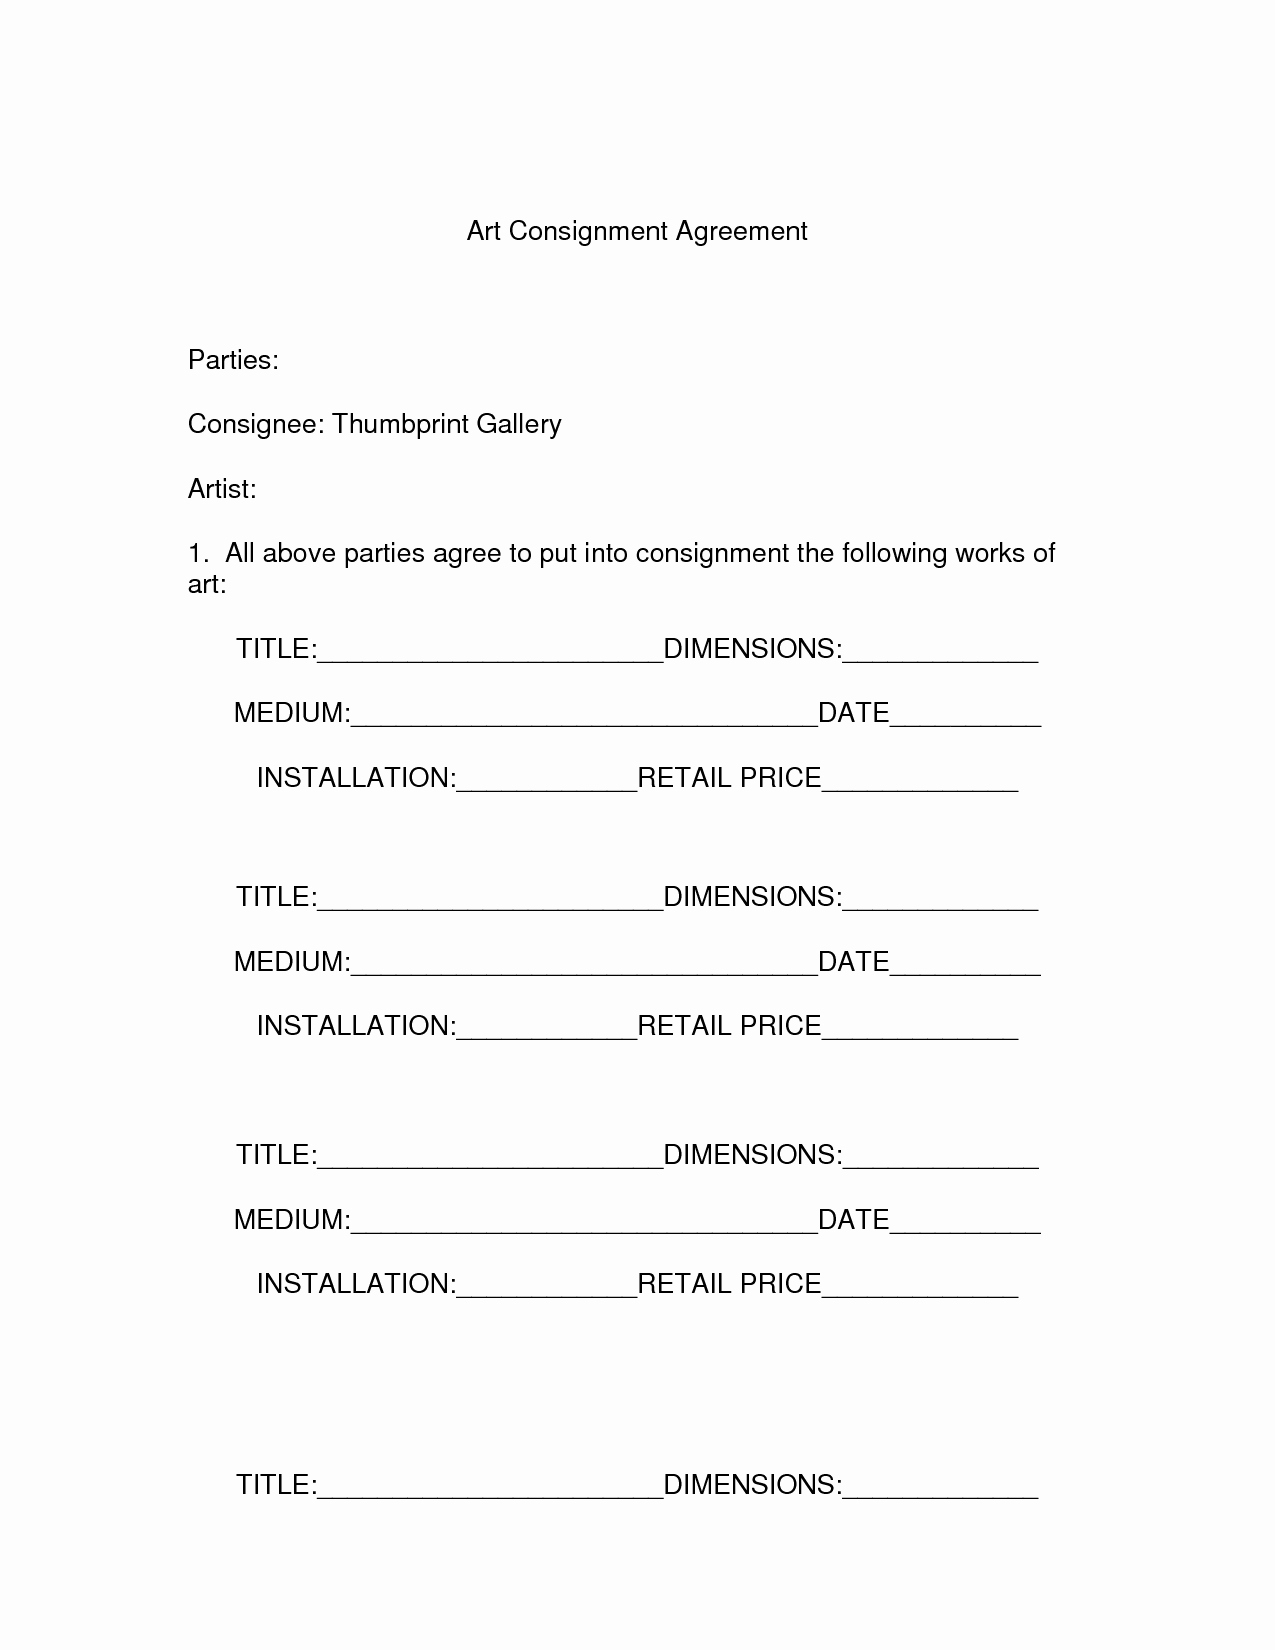 Gallery Consignment Agreement Freelance Artist Contract Template Mathosproject